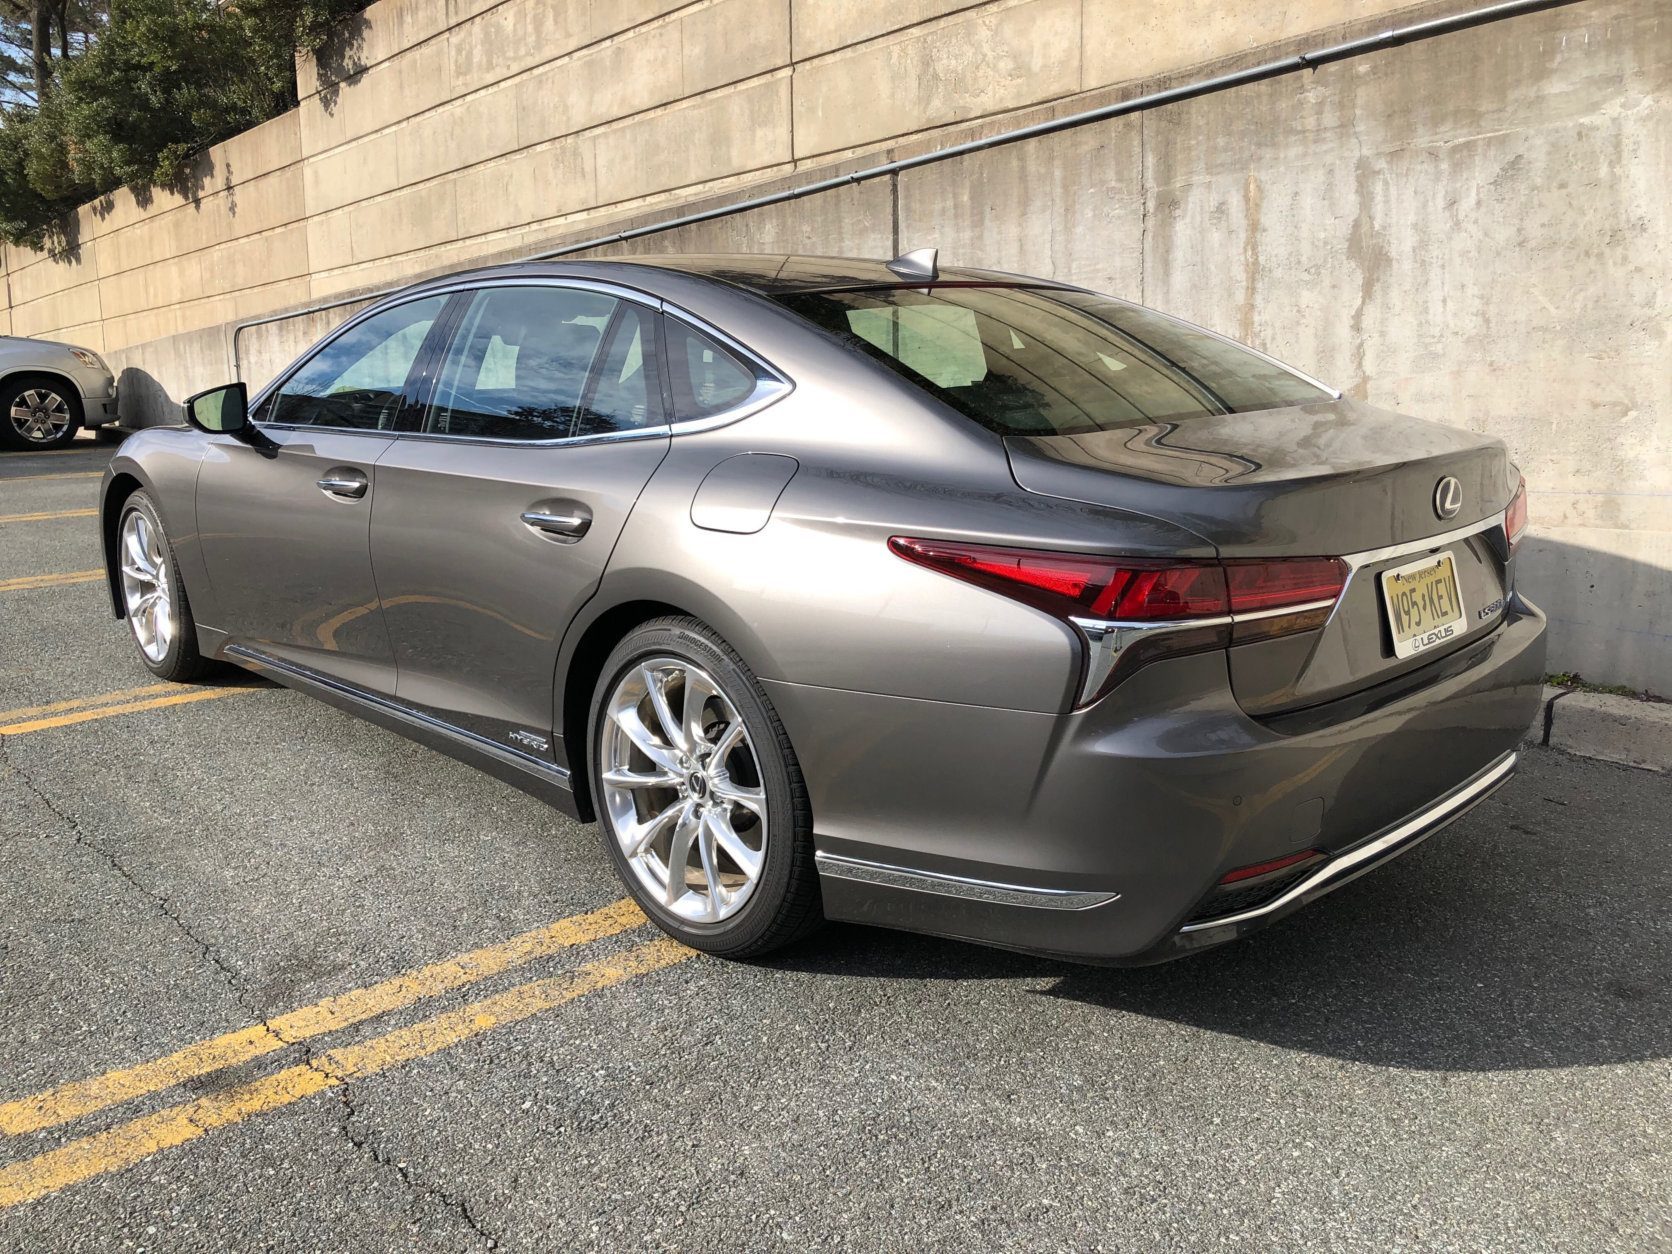 The LS 500h, the hybrid version of Lexus’ big luxury sedan, boasts one of the most opulent interiors available in a car today. (WTOP/John Aaron)